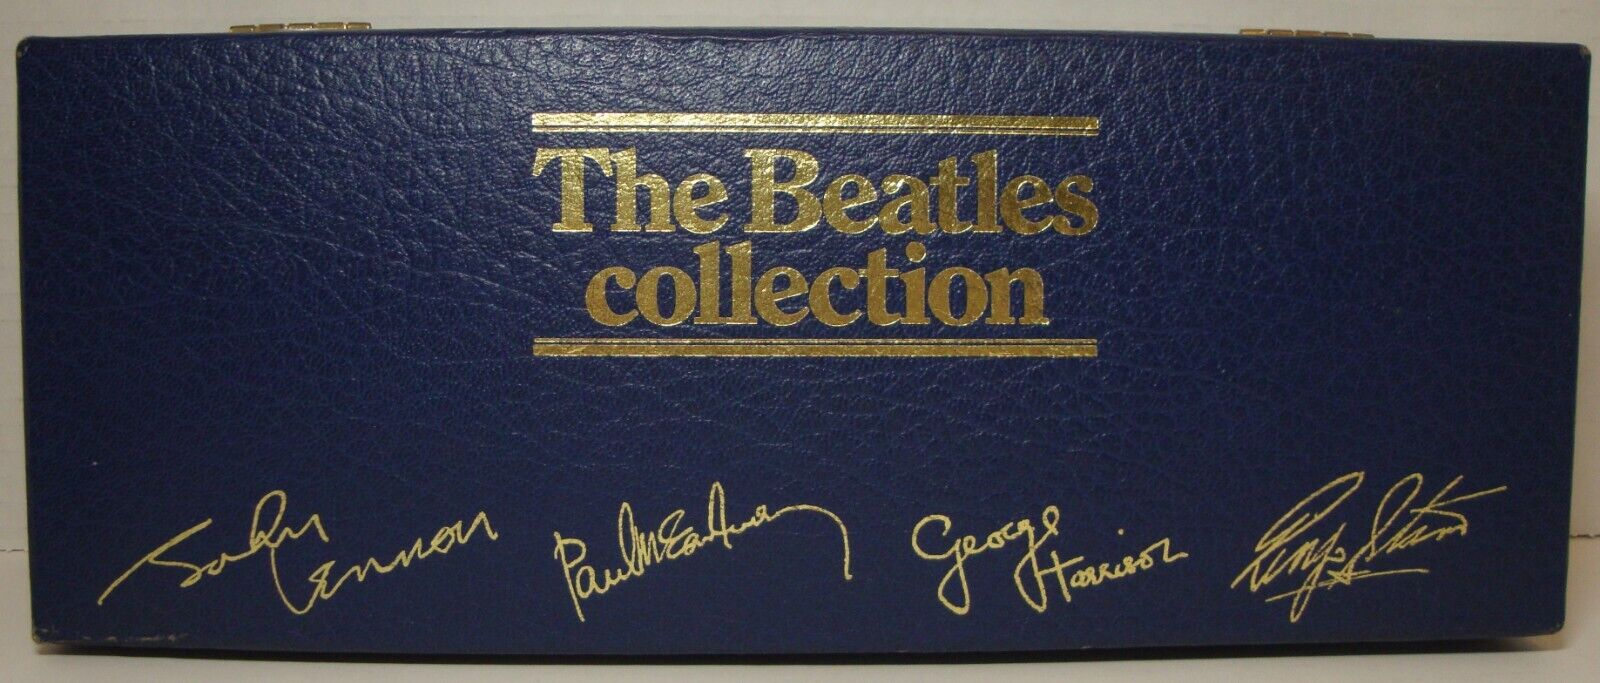 THE BEATLES COLLECTION BOX SET OF 13 CASSETTE TAPES 1982 PARLOPHONE TCBC13